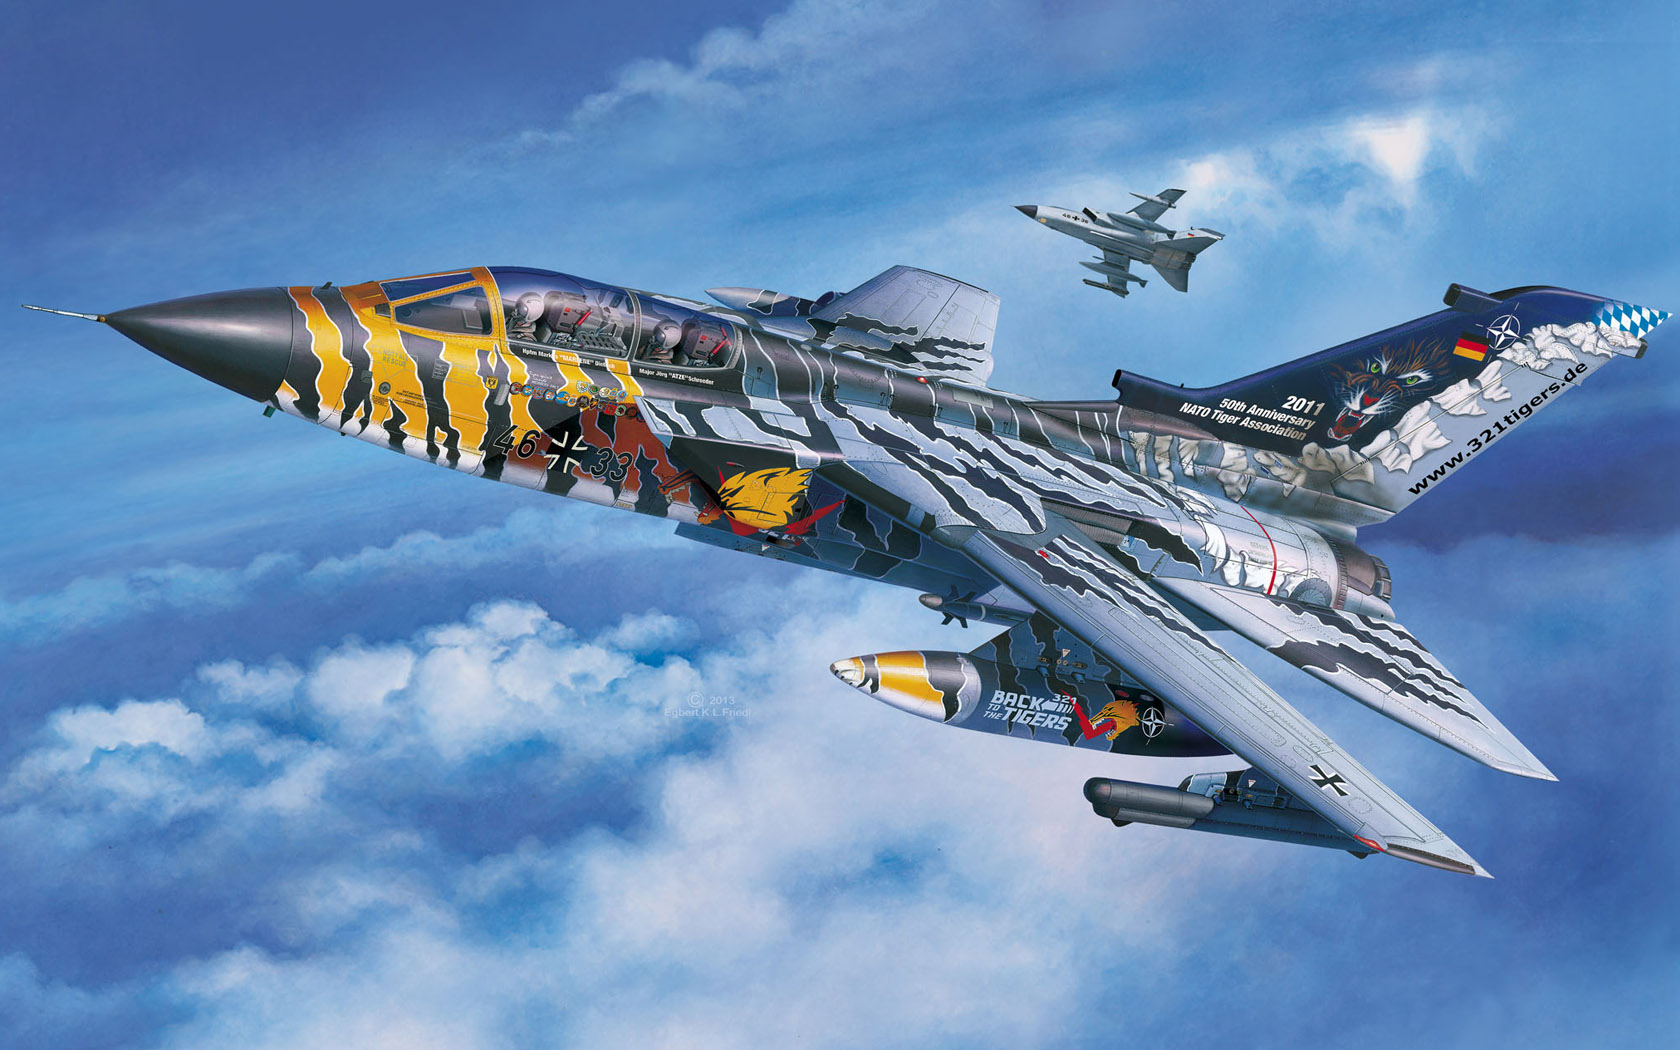 General 1680x1050 aircraft flying sky military military vehicle clouds missiles German Flag Panavia Tornado jet fighter Luftwaffe jets animal print livery NATO Egbert Friedl Boxart